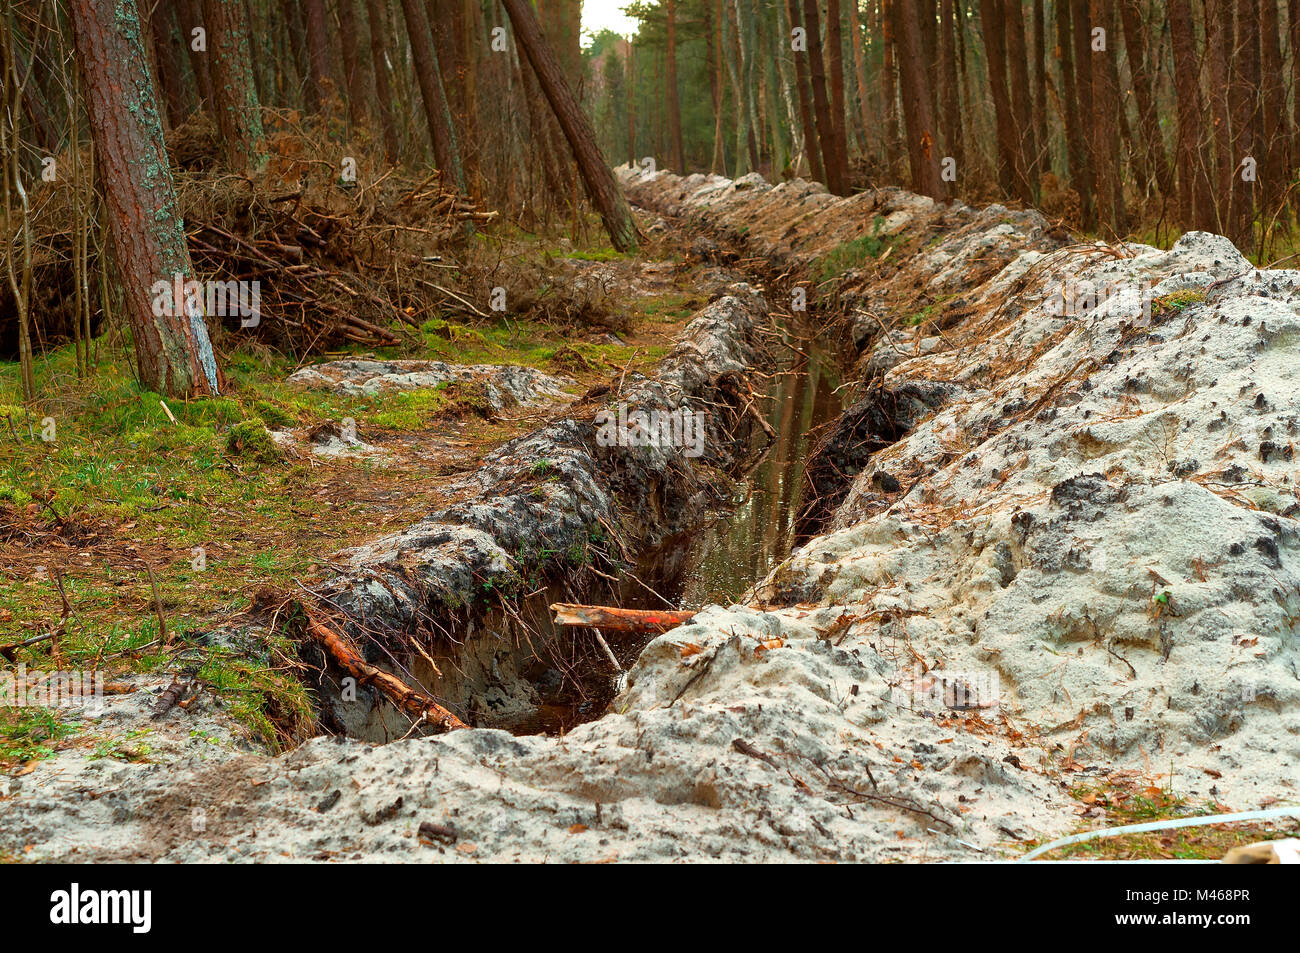 the trench in the pine forest, the groove for laying cable in the forest, the destruction of the environment Stock Photo